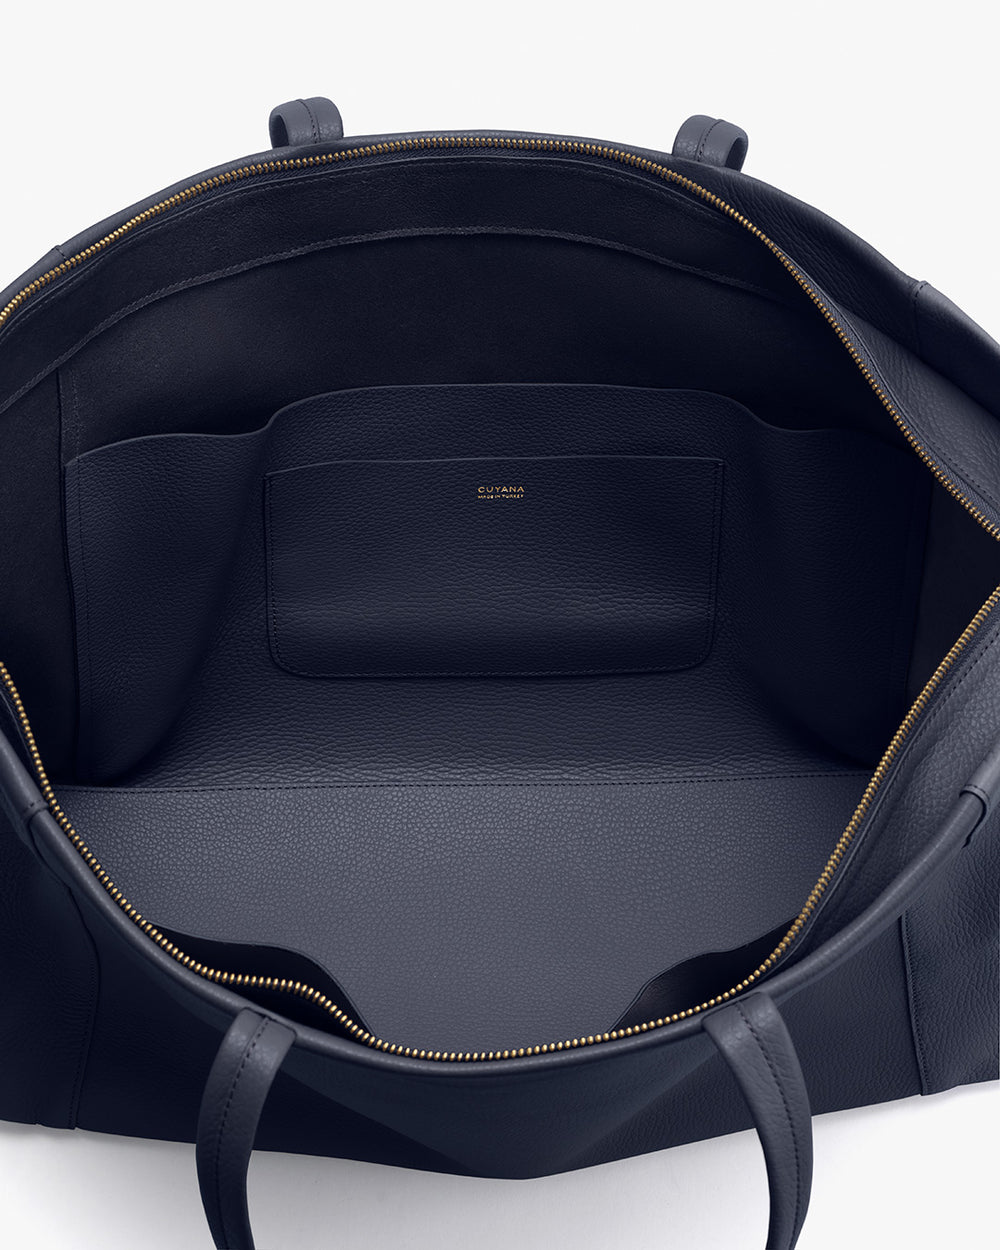 Open handbag interior showing one main compartment and a small pocket.